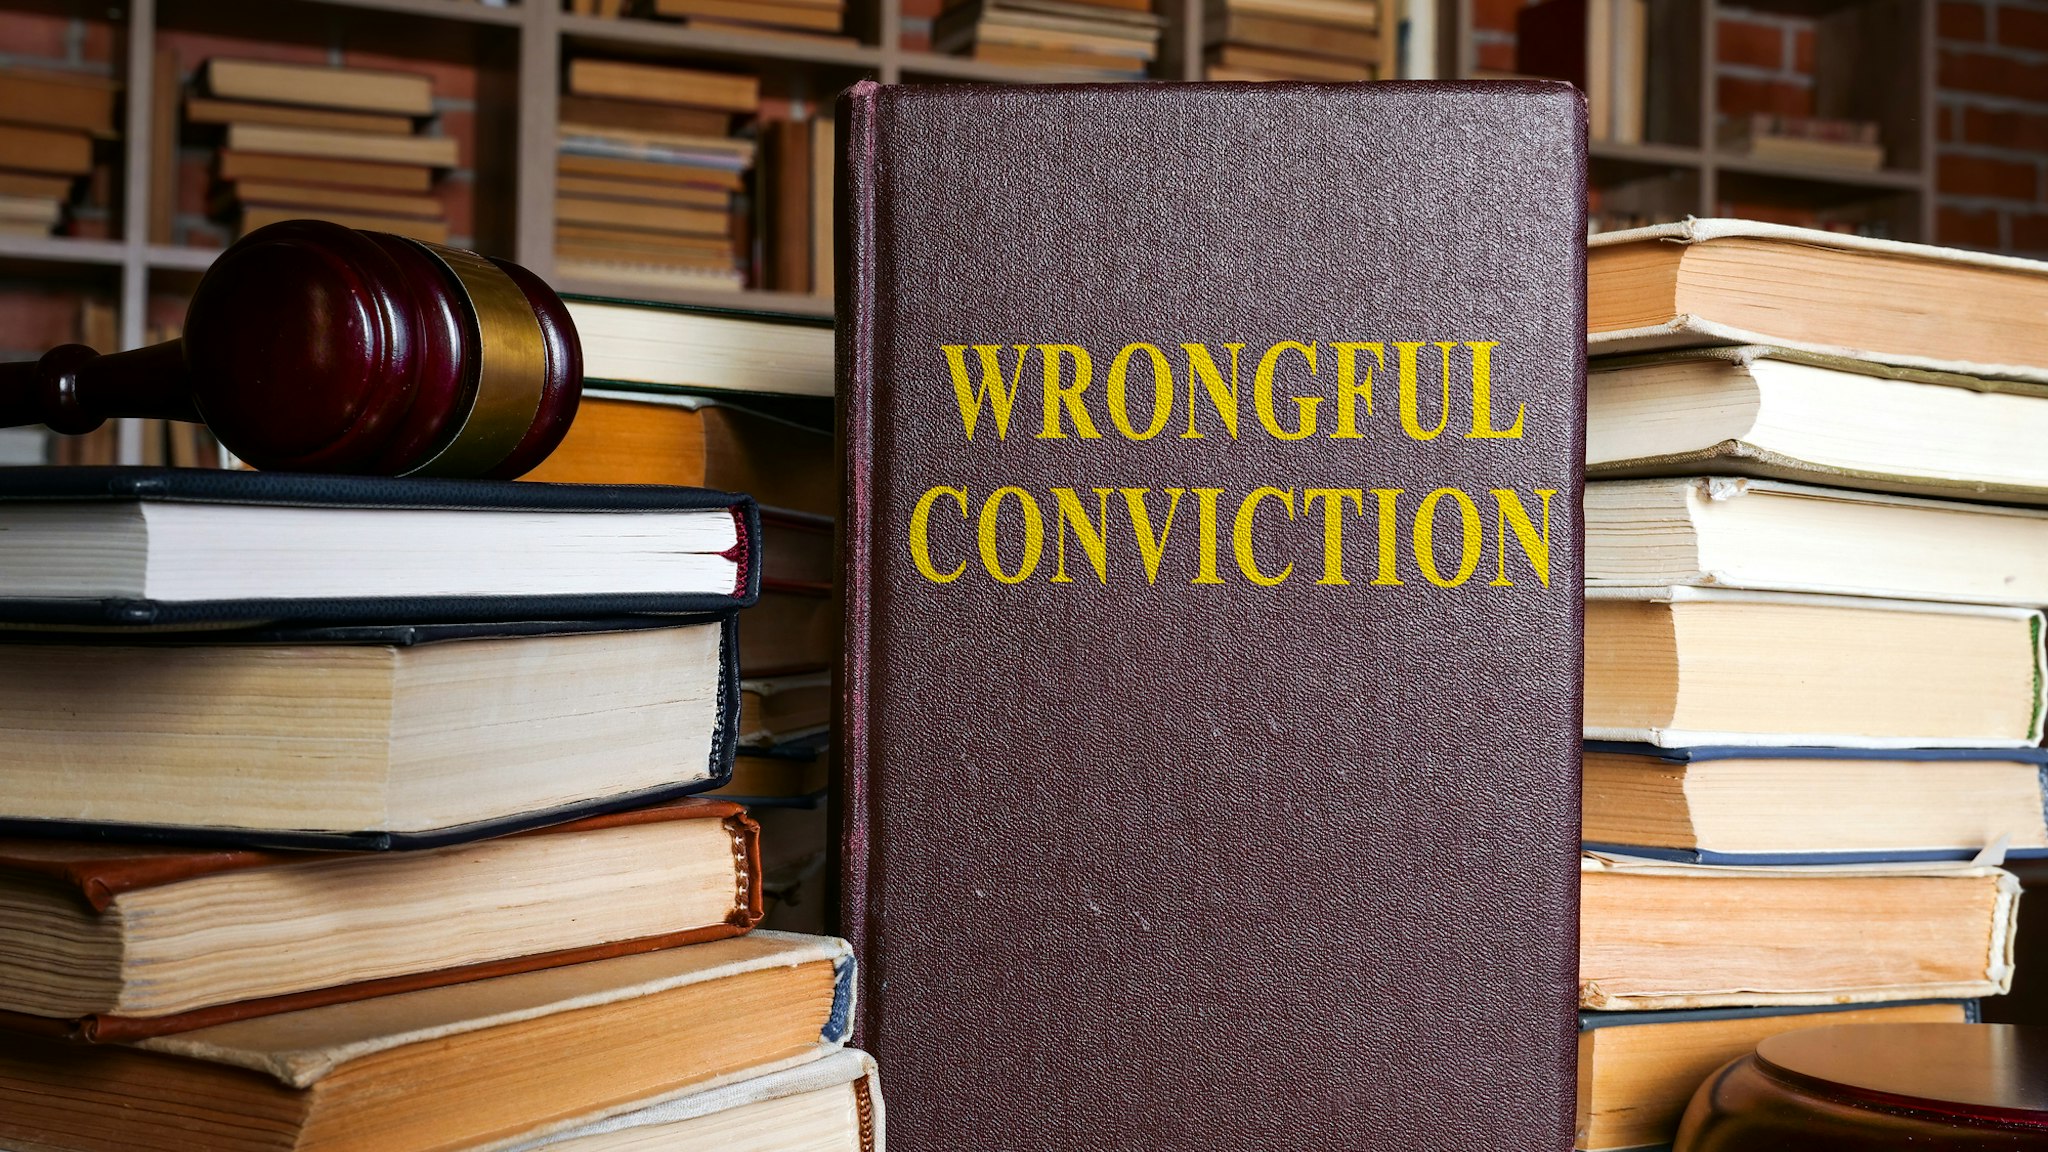 The book about Wrongful conviction and gavel. - stock photo